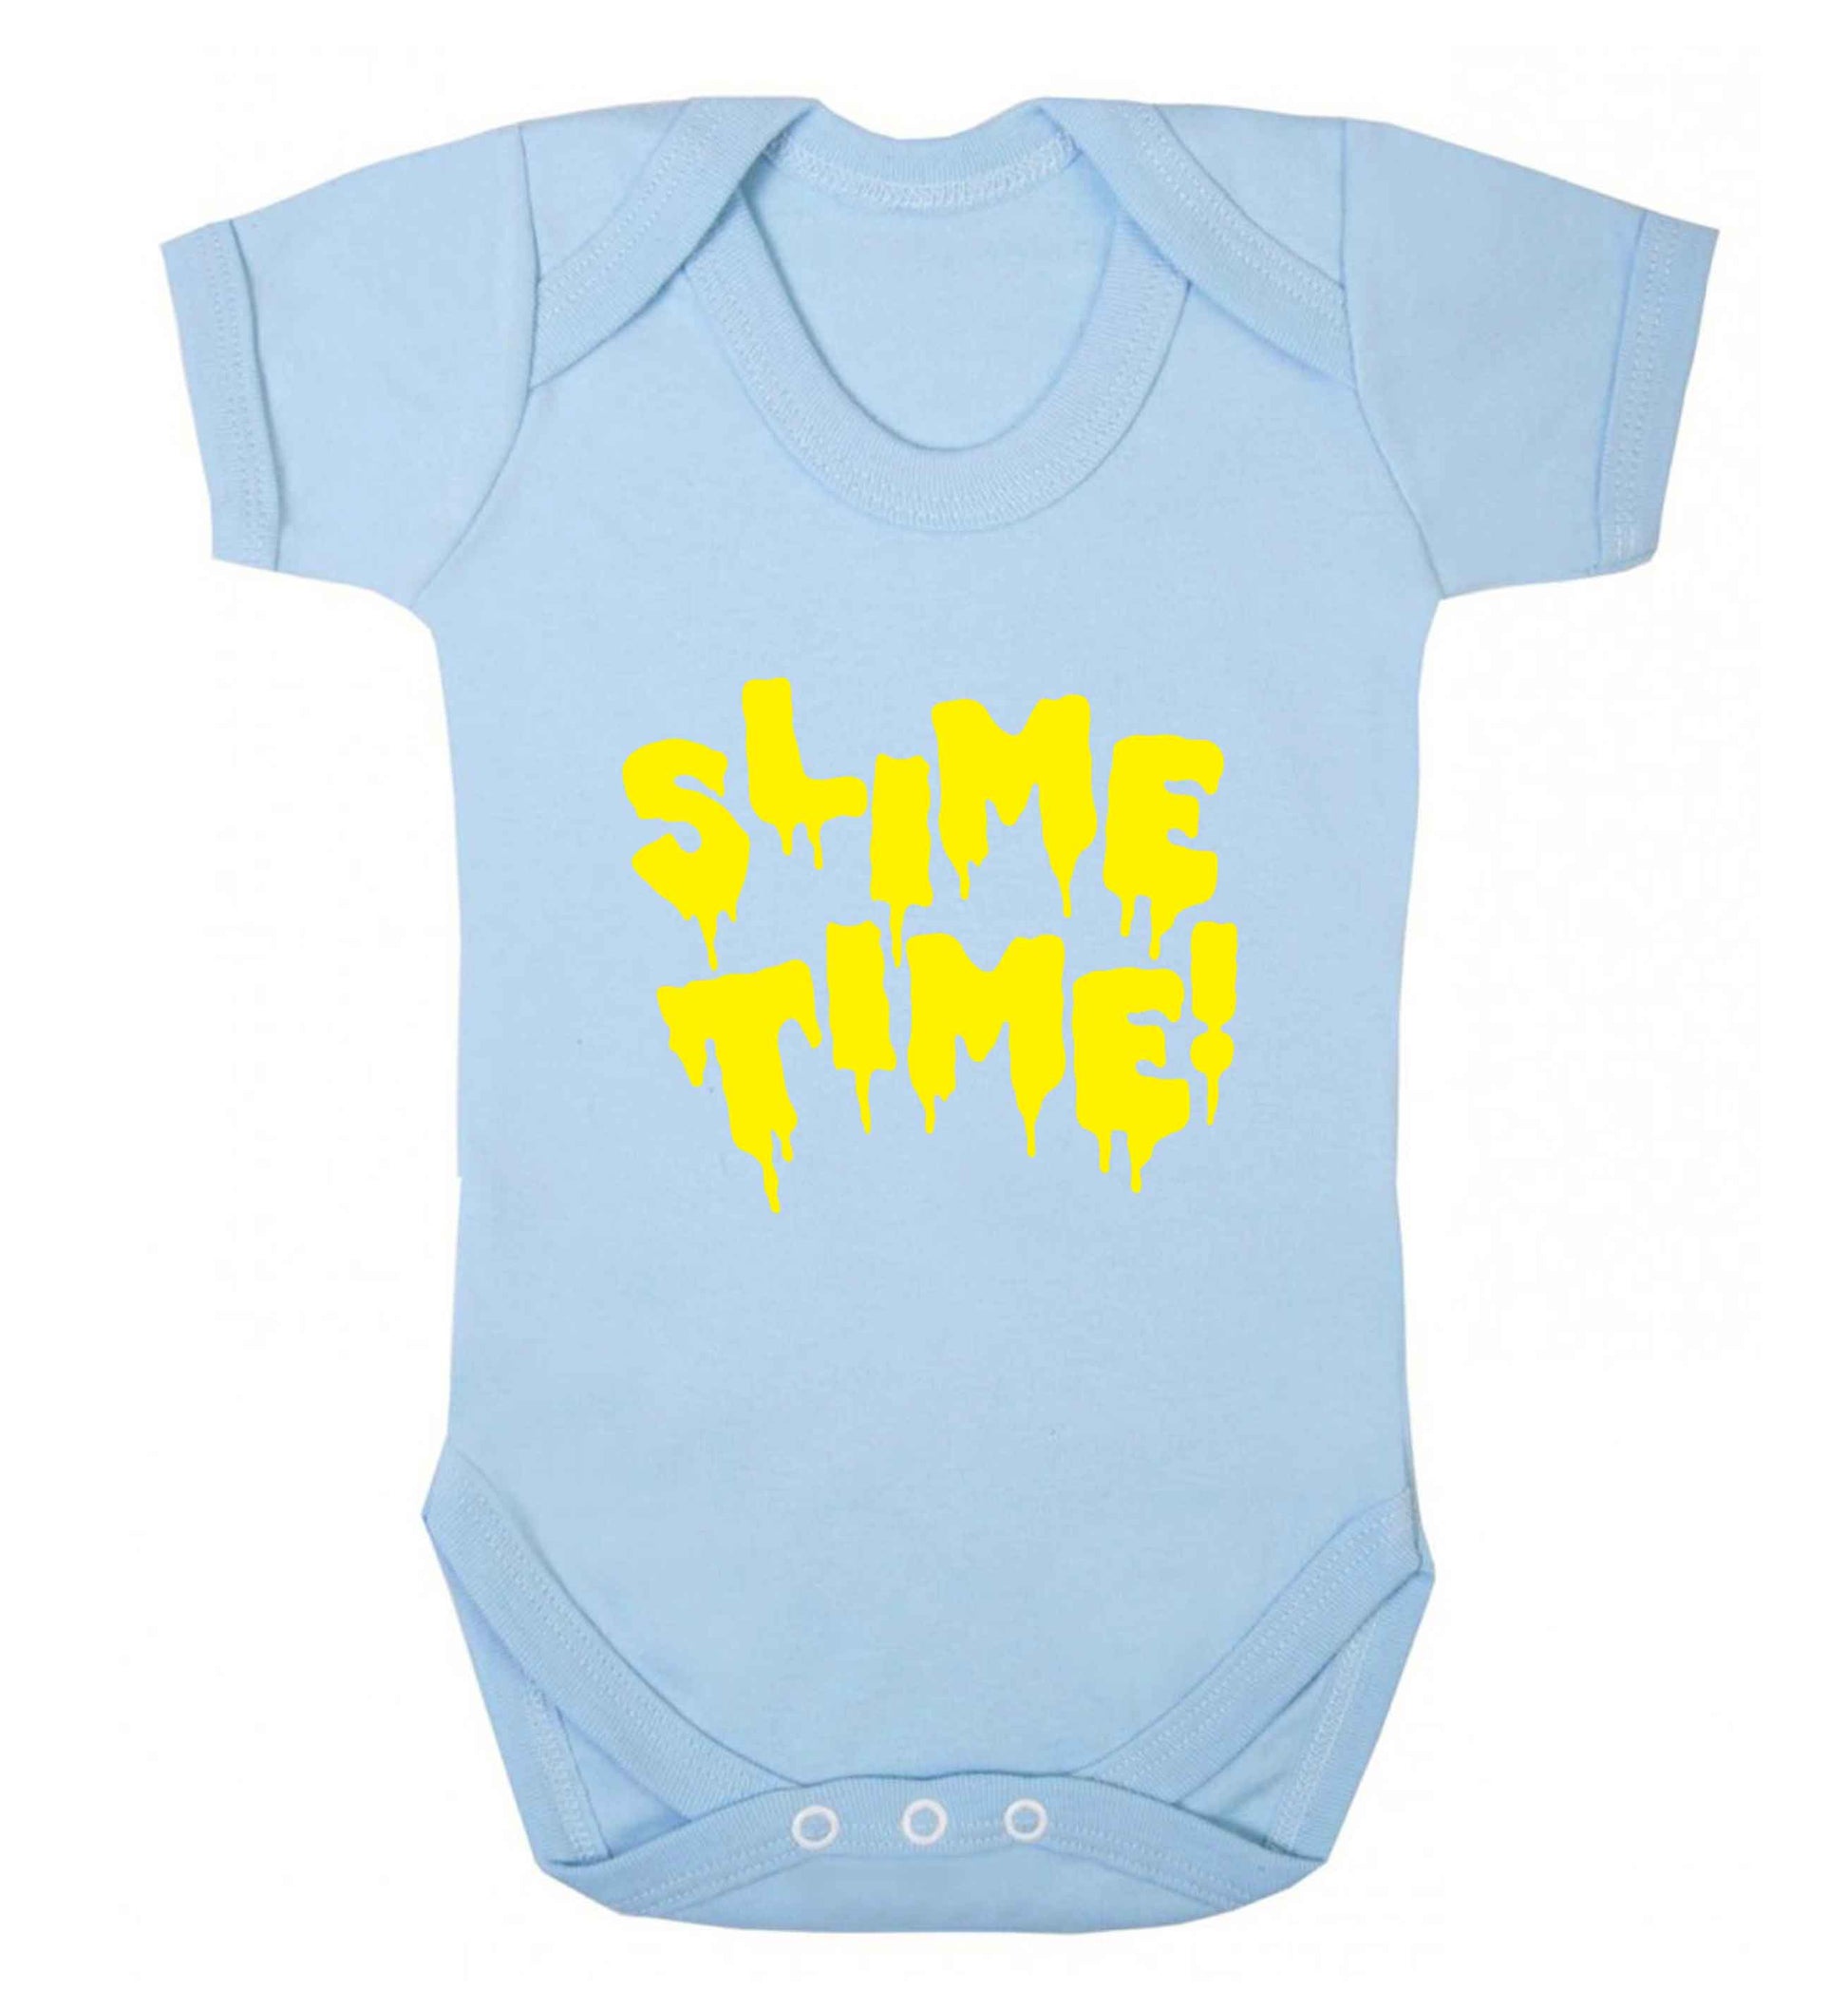 Neon yellow slime time baby vest pale blue 18-24 months